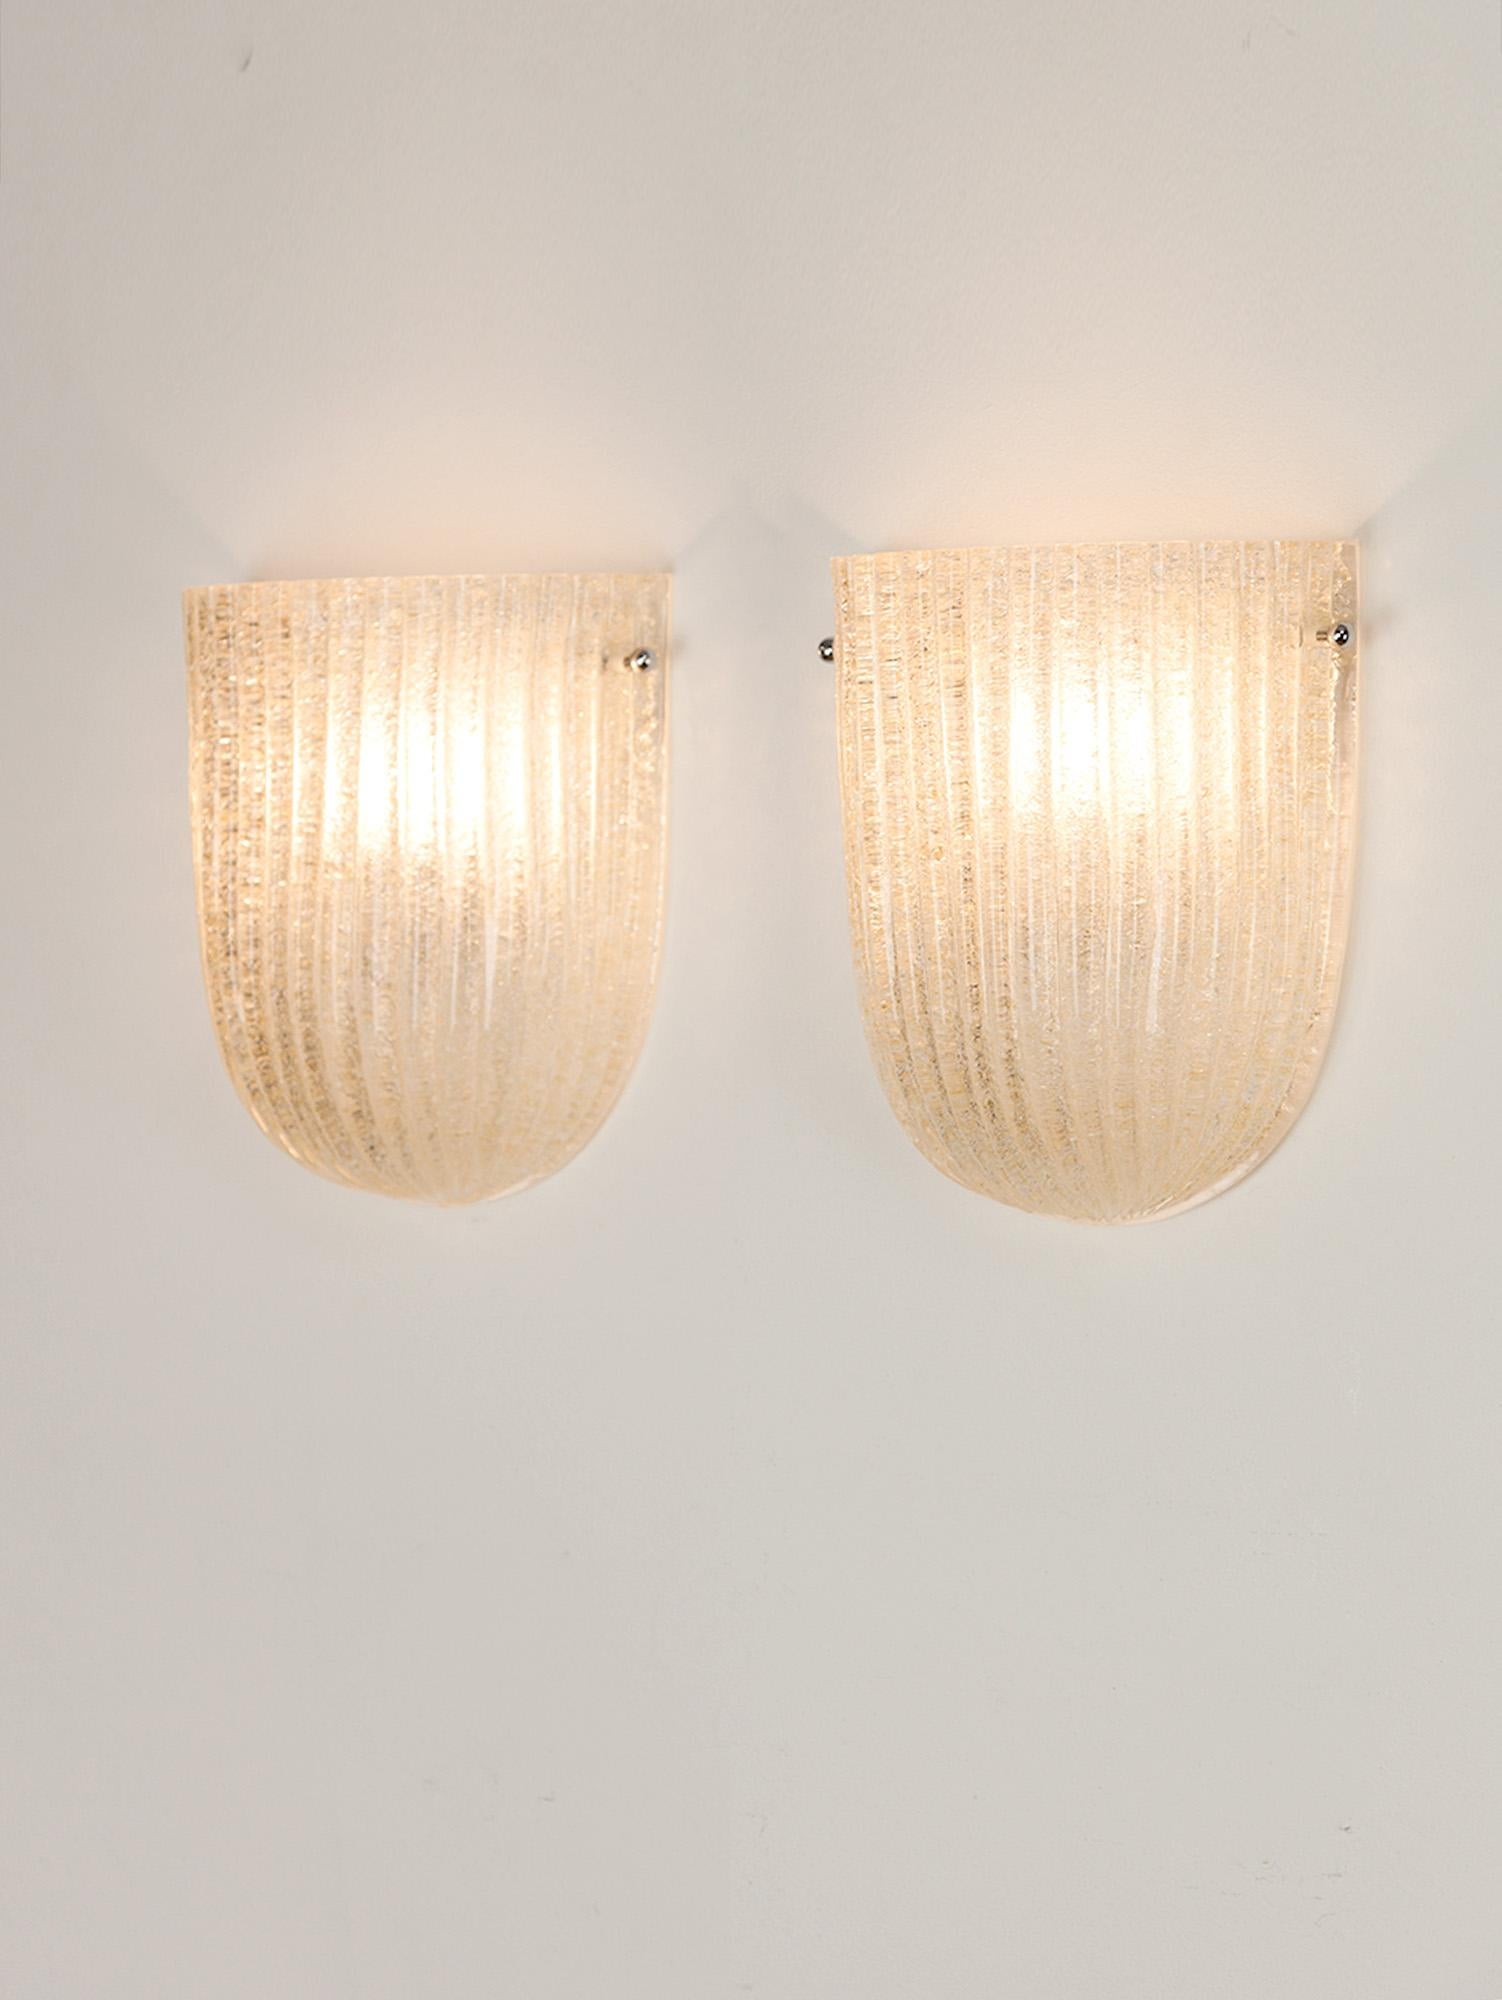 Stunning Italian wall lights by Zonca with Murano glass shade and brass fixtures. The moulded glass shade has a lovely ribbed texture with subtle gold flecks emitting a soft ambient light. Made in Italy, 1970s.

Excellent vintage condition with some